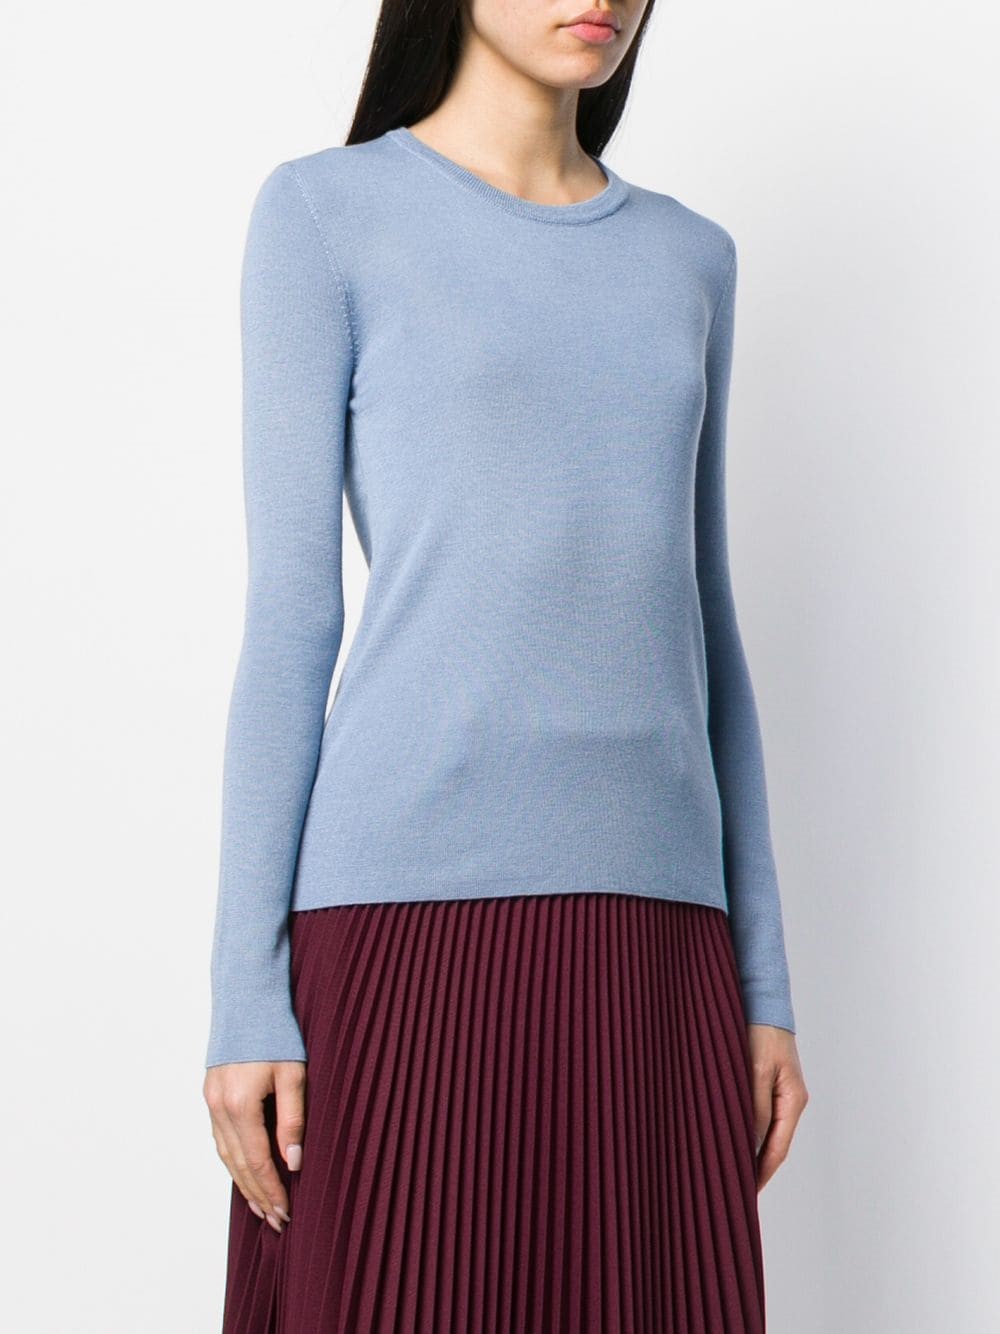 prada ROUND NECK PULLOVER available on montiboutique.com - 29228